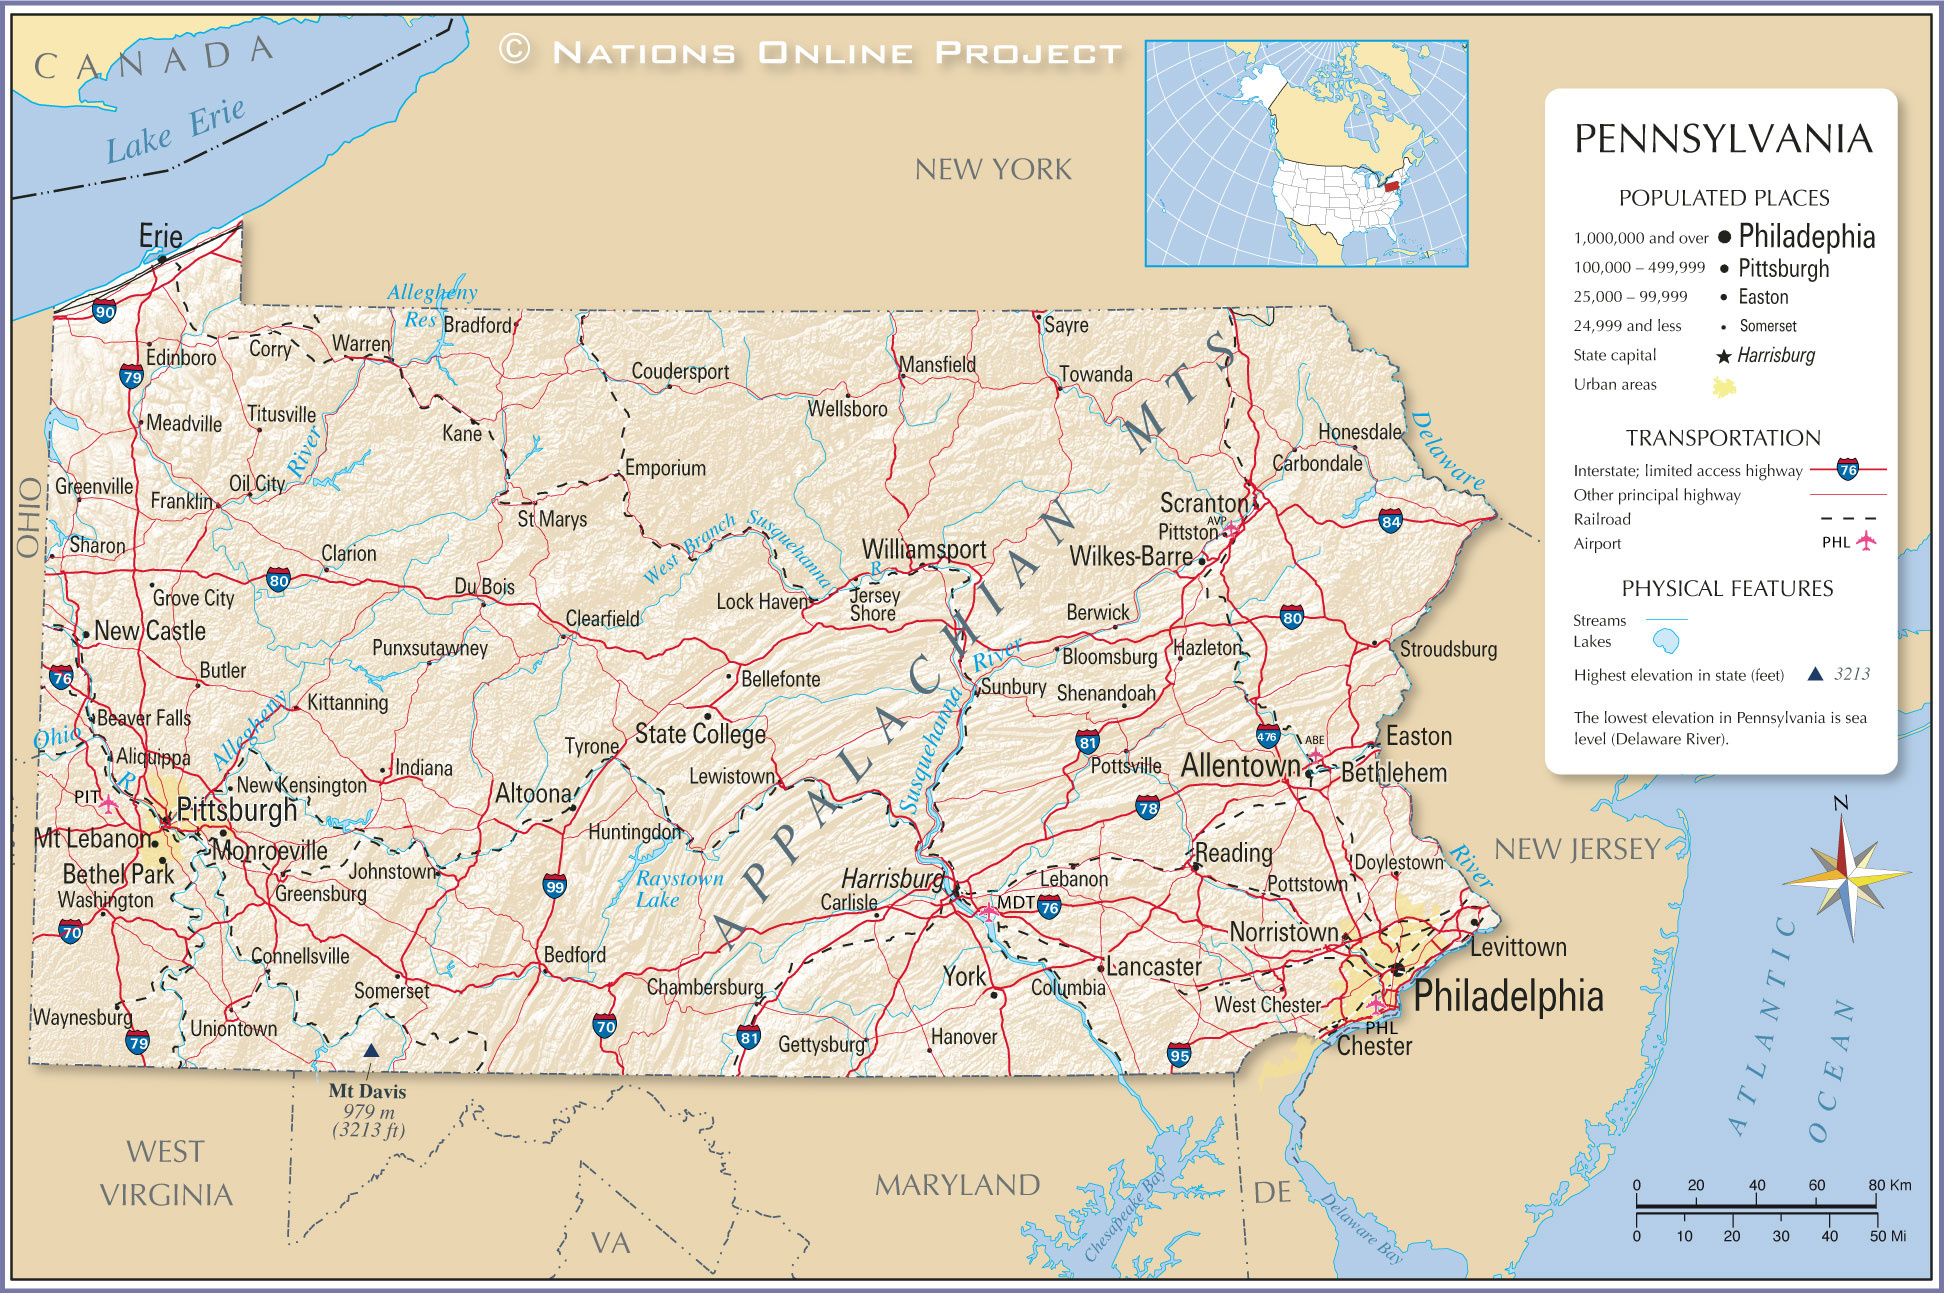 Reference Map of Pennsylvania